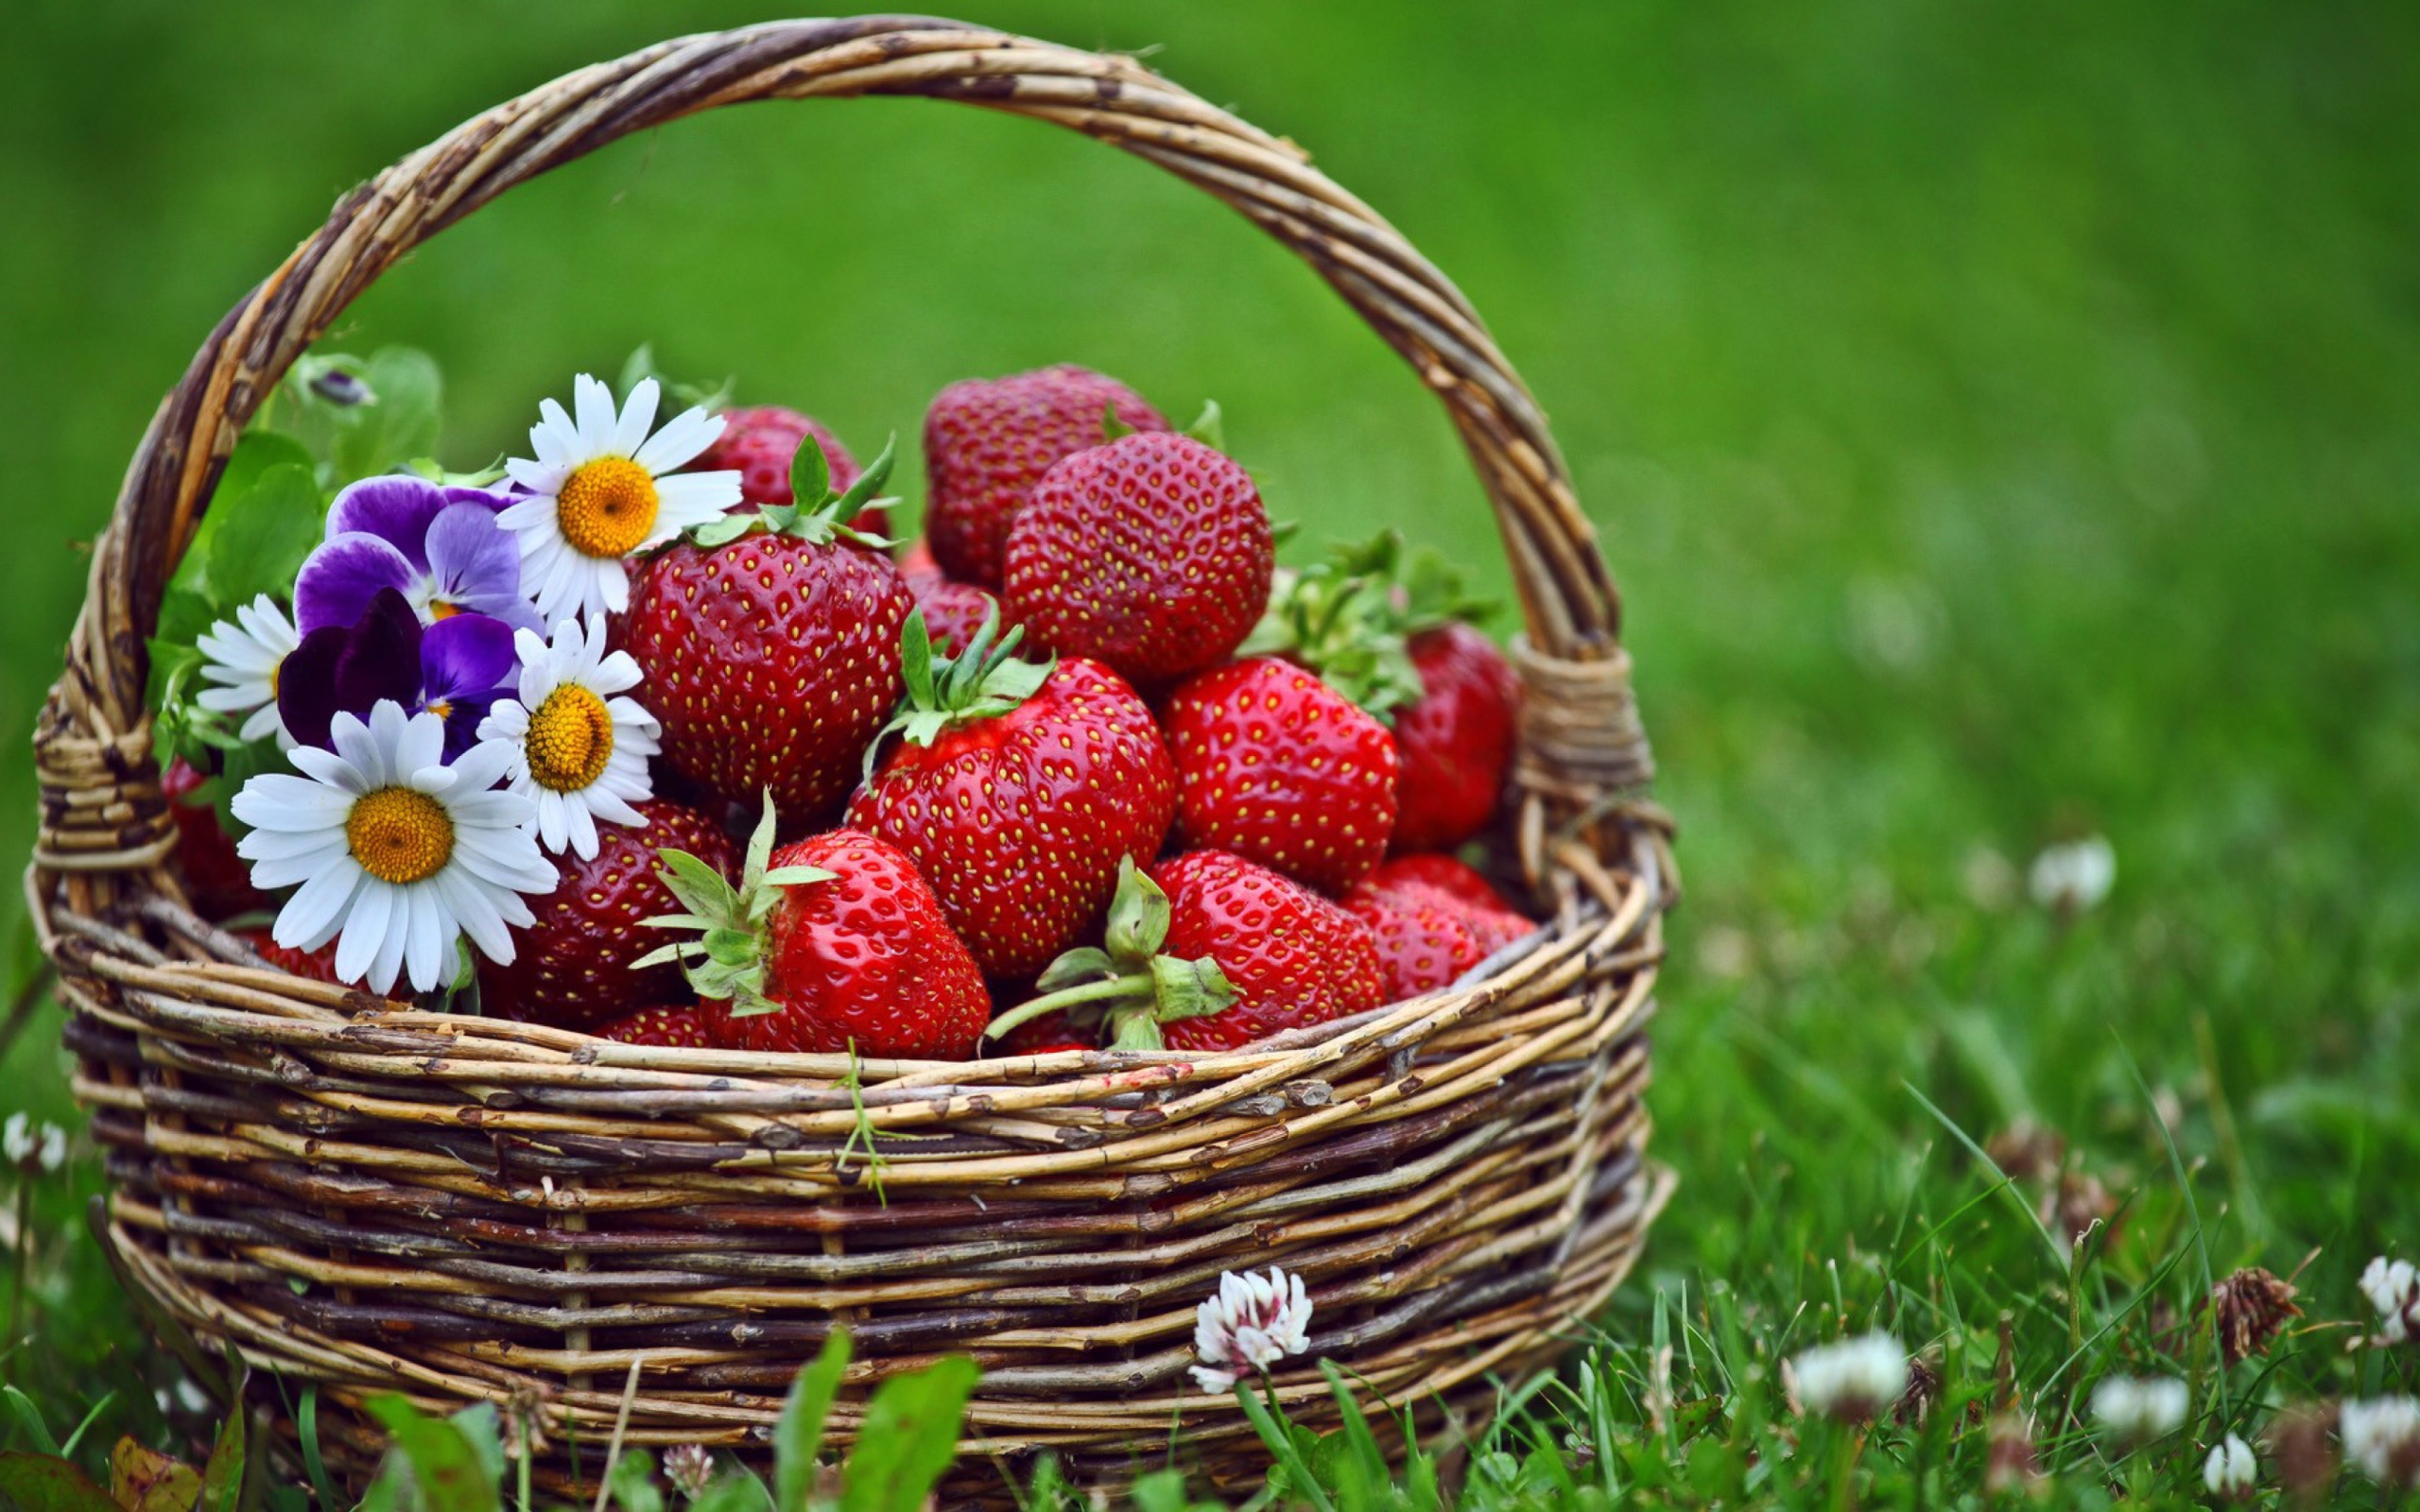 Berries And Flowers wallpaper 2560x1600